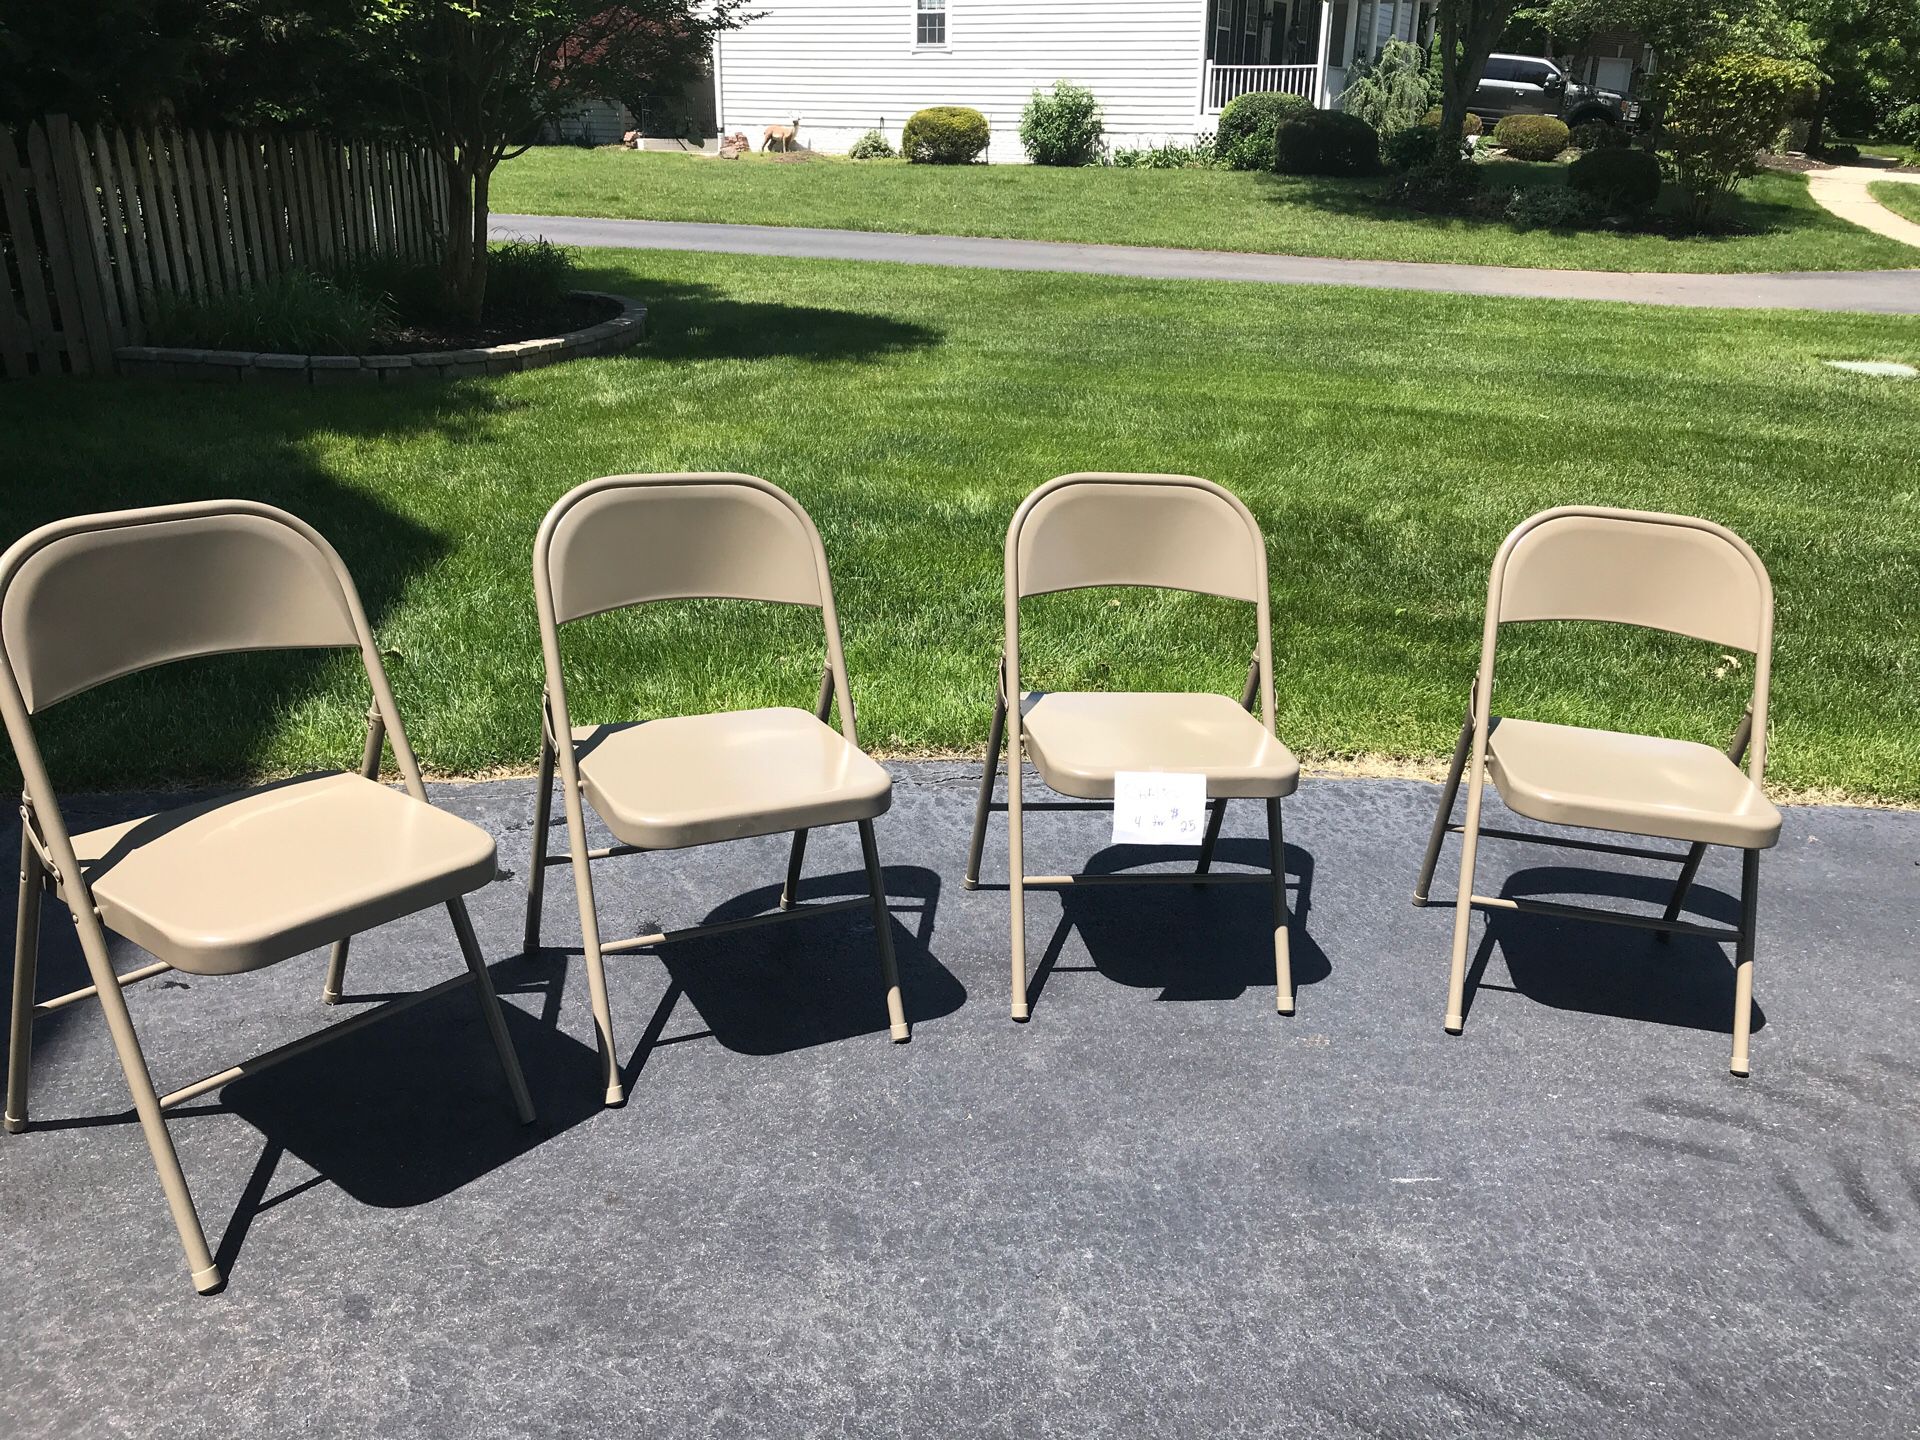 4 hardly used metal chairs